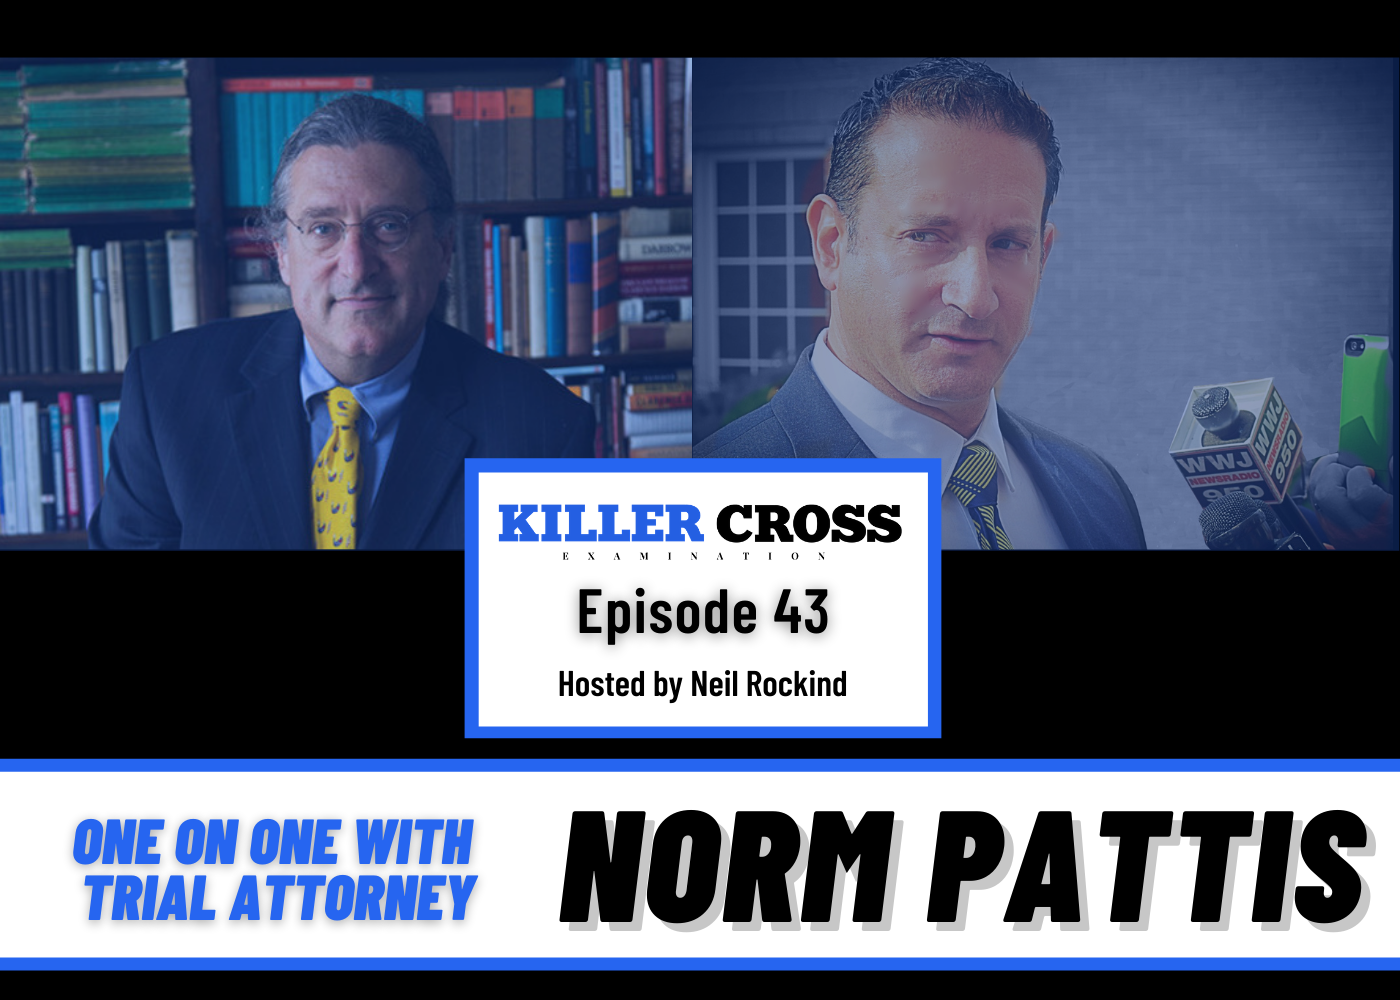 Episode 43: One on One with Trial Attorney- Norm Pattis